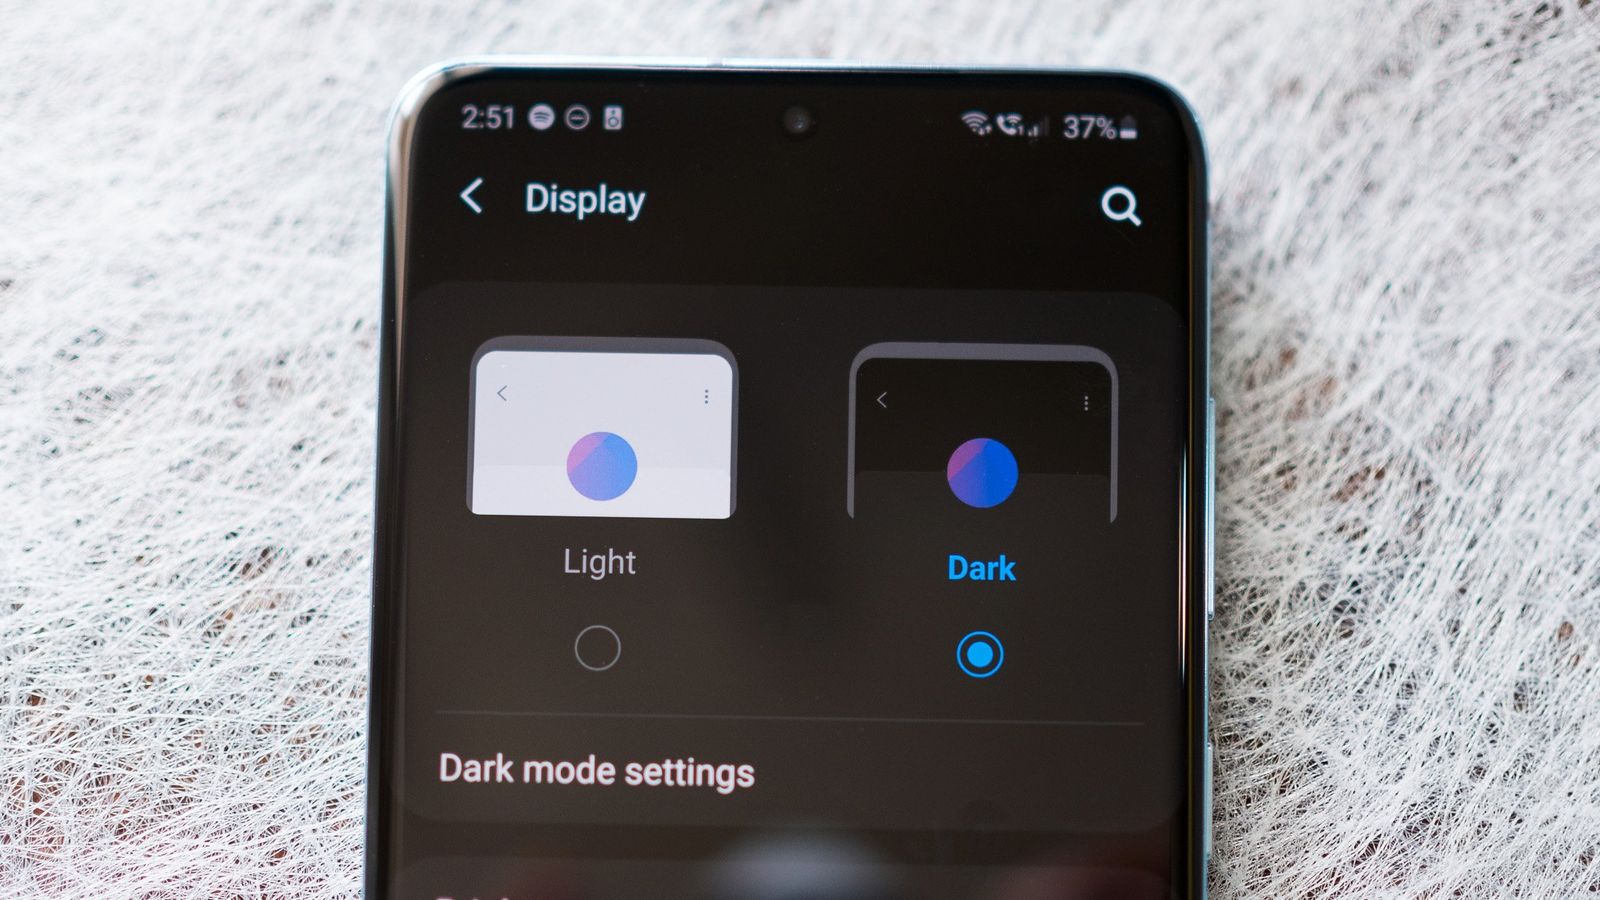 How to enable dark mode on the Galaxy S20